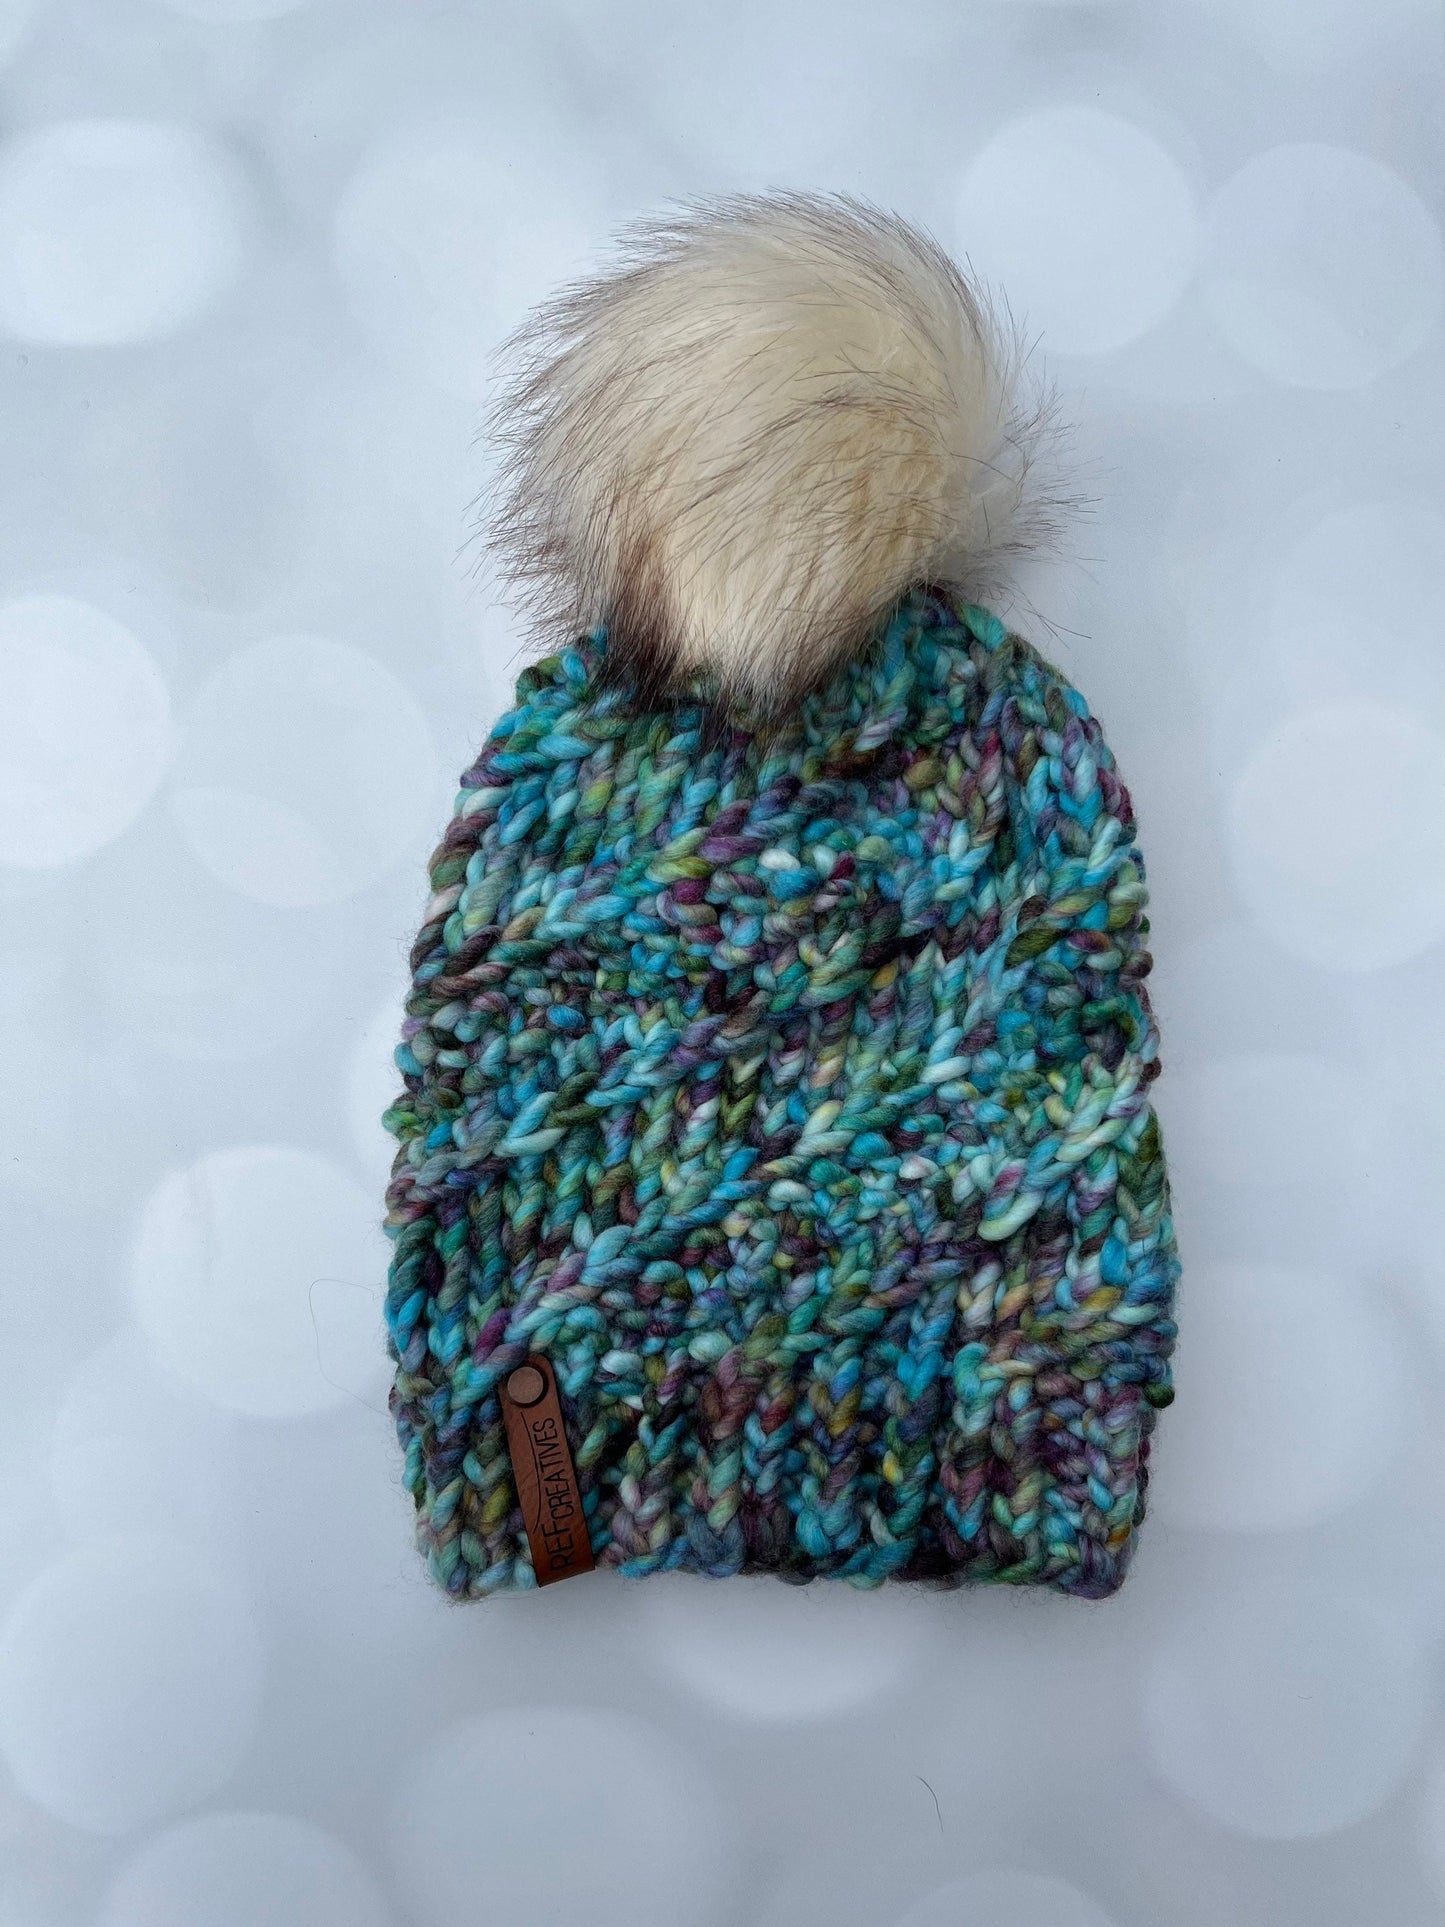 Cool Confetti Hand Knit Hat with Hand Dyed Yarn